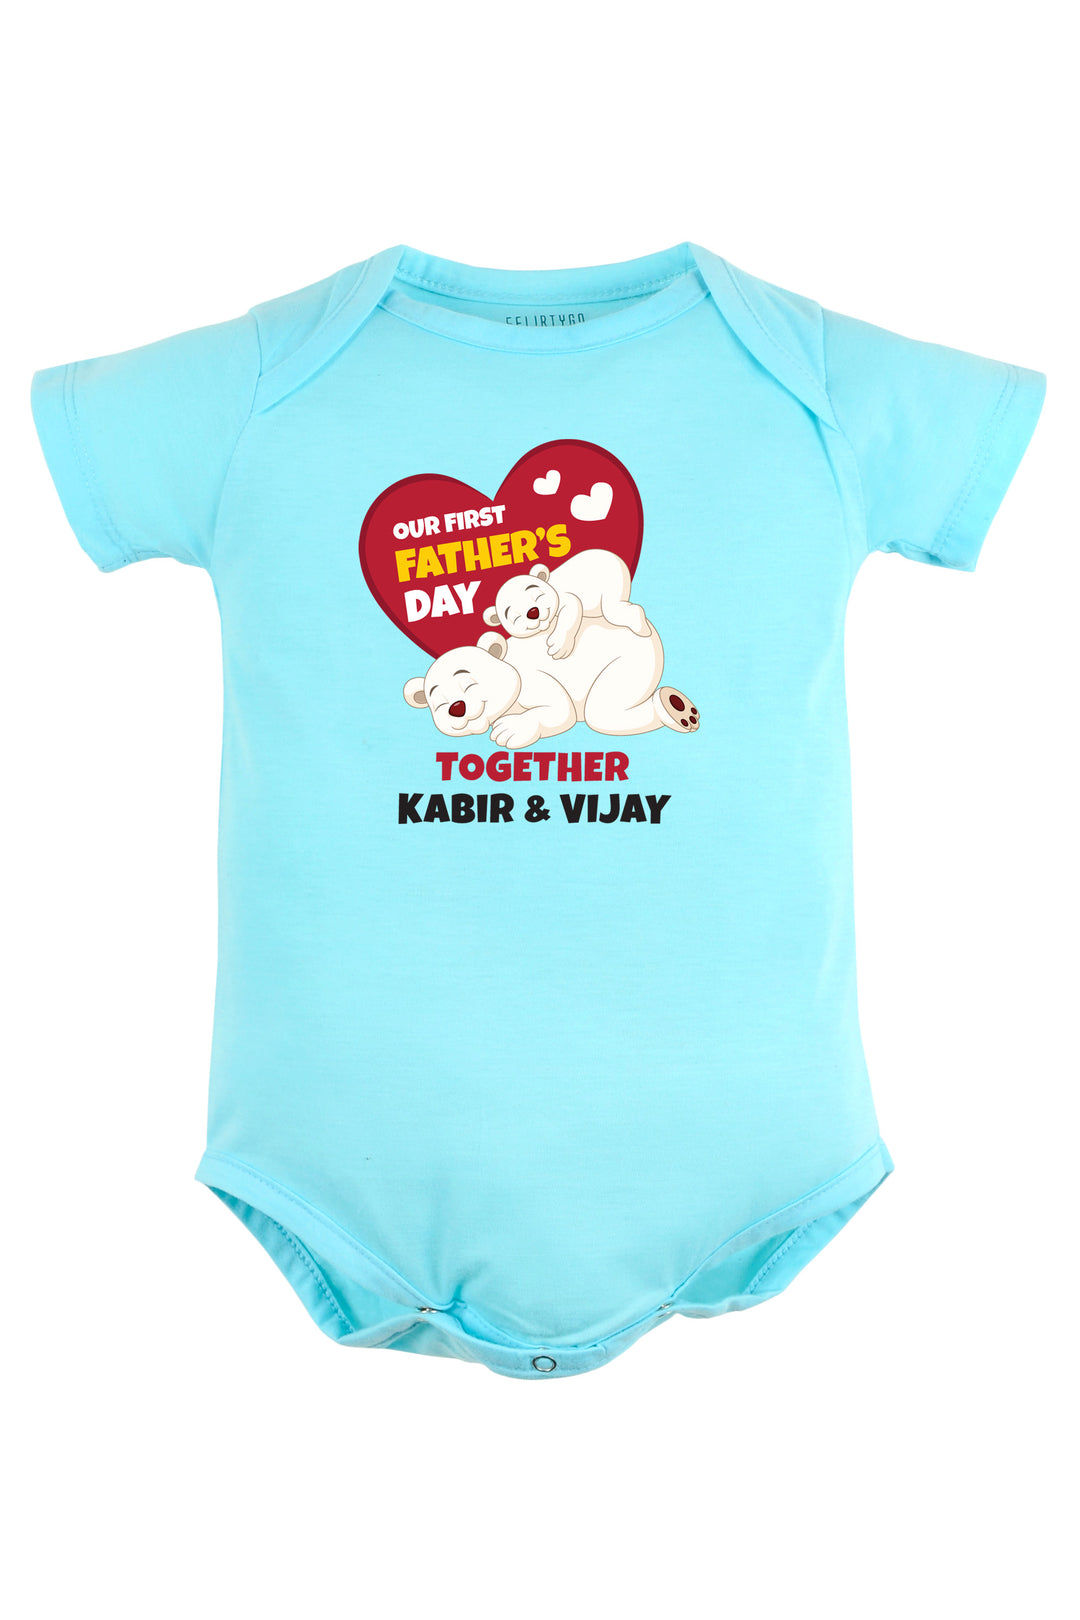 Our First Father's Day Together Baby Romper | Onesies w/ Custom Name